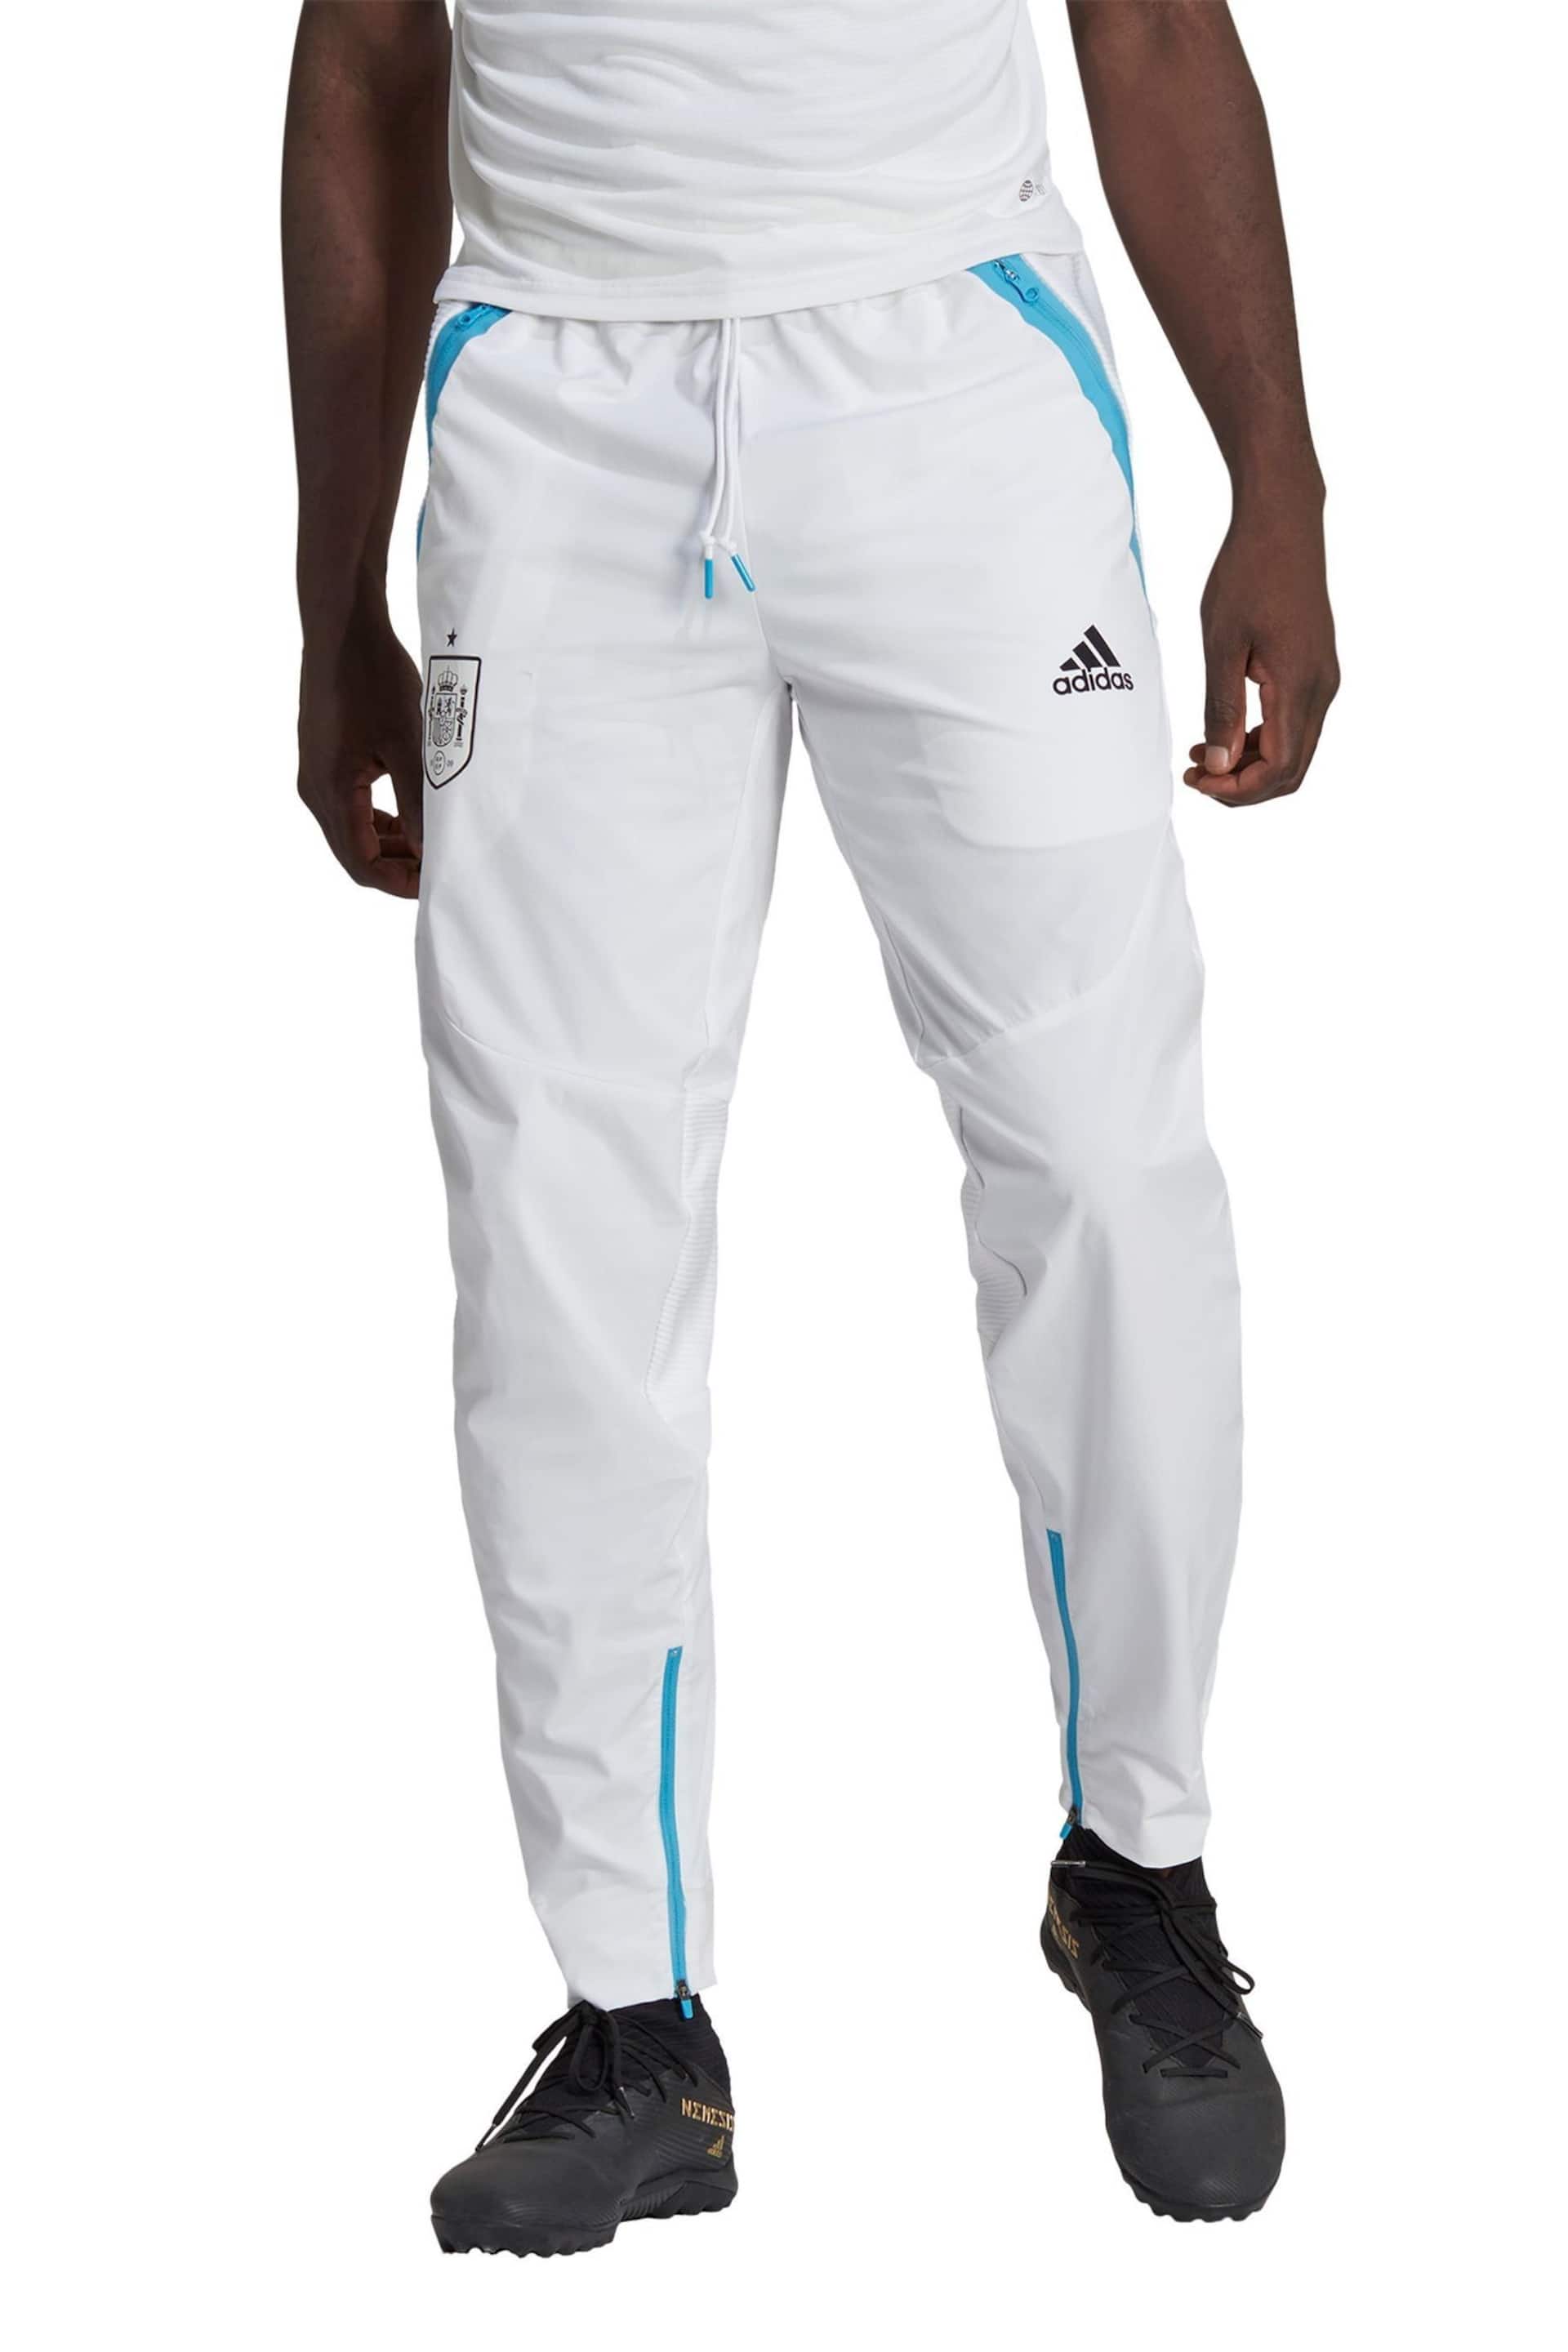 adidas White Spain World Cup Game Day Joggers - Image 1 of 2